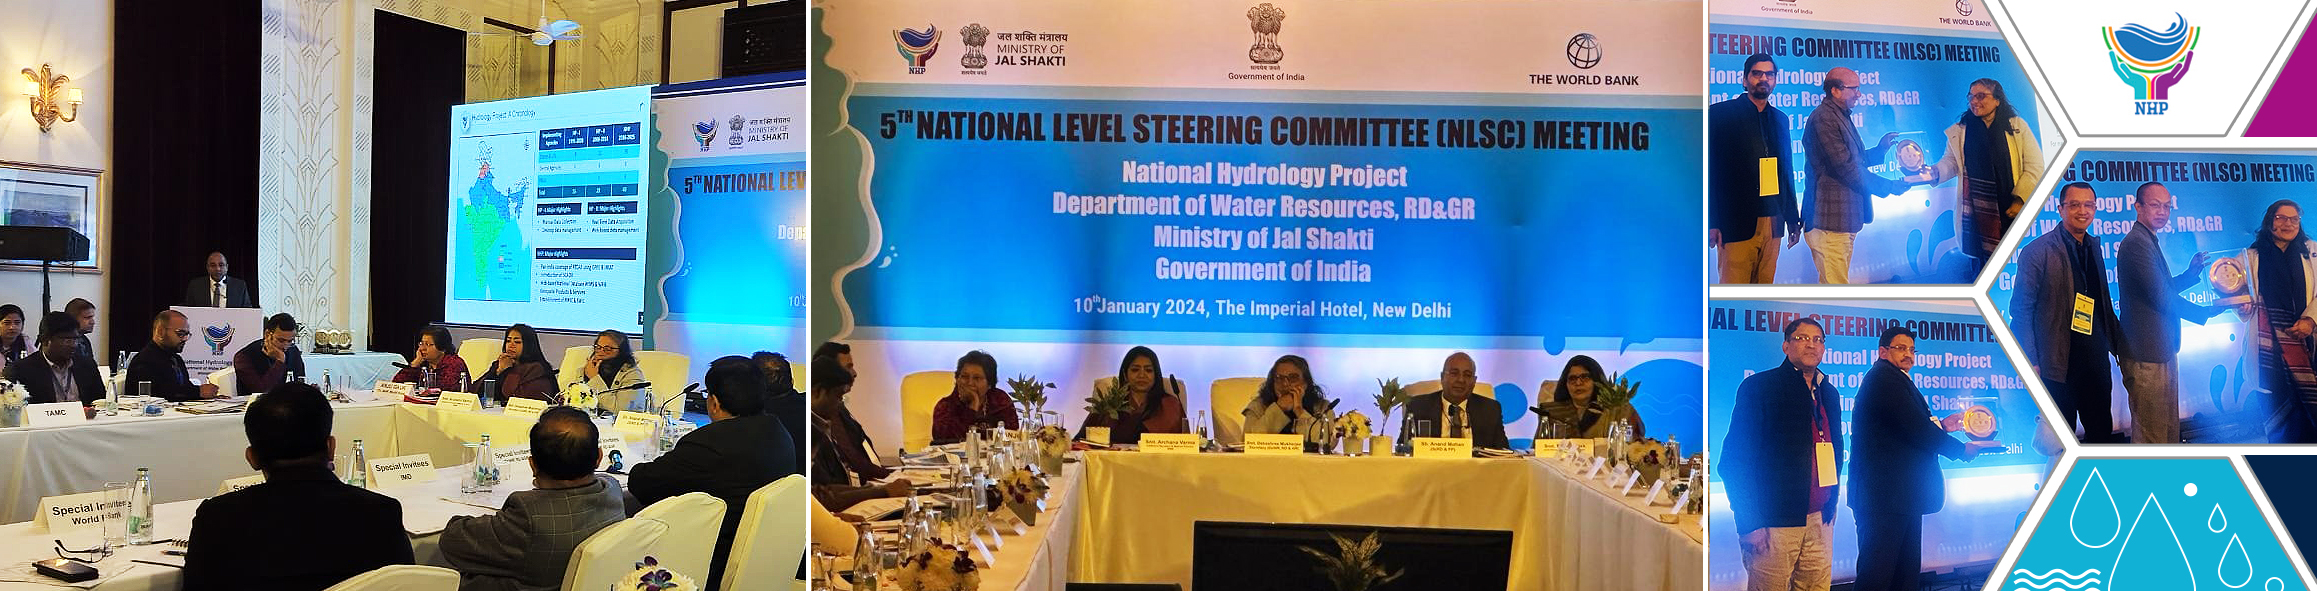 5th National Level Steering Committee (NLSC) Meeting of National Hydrology Project (NHP) on 10th January 2024 at The Imperial Hotel, New Delhi